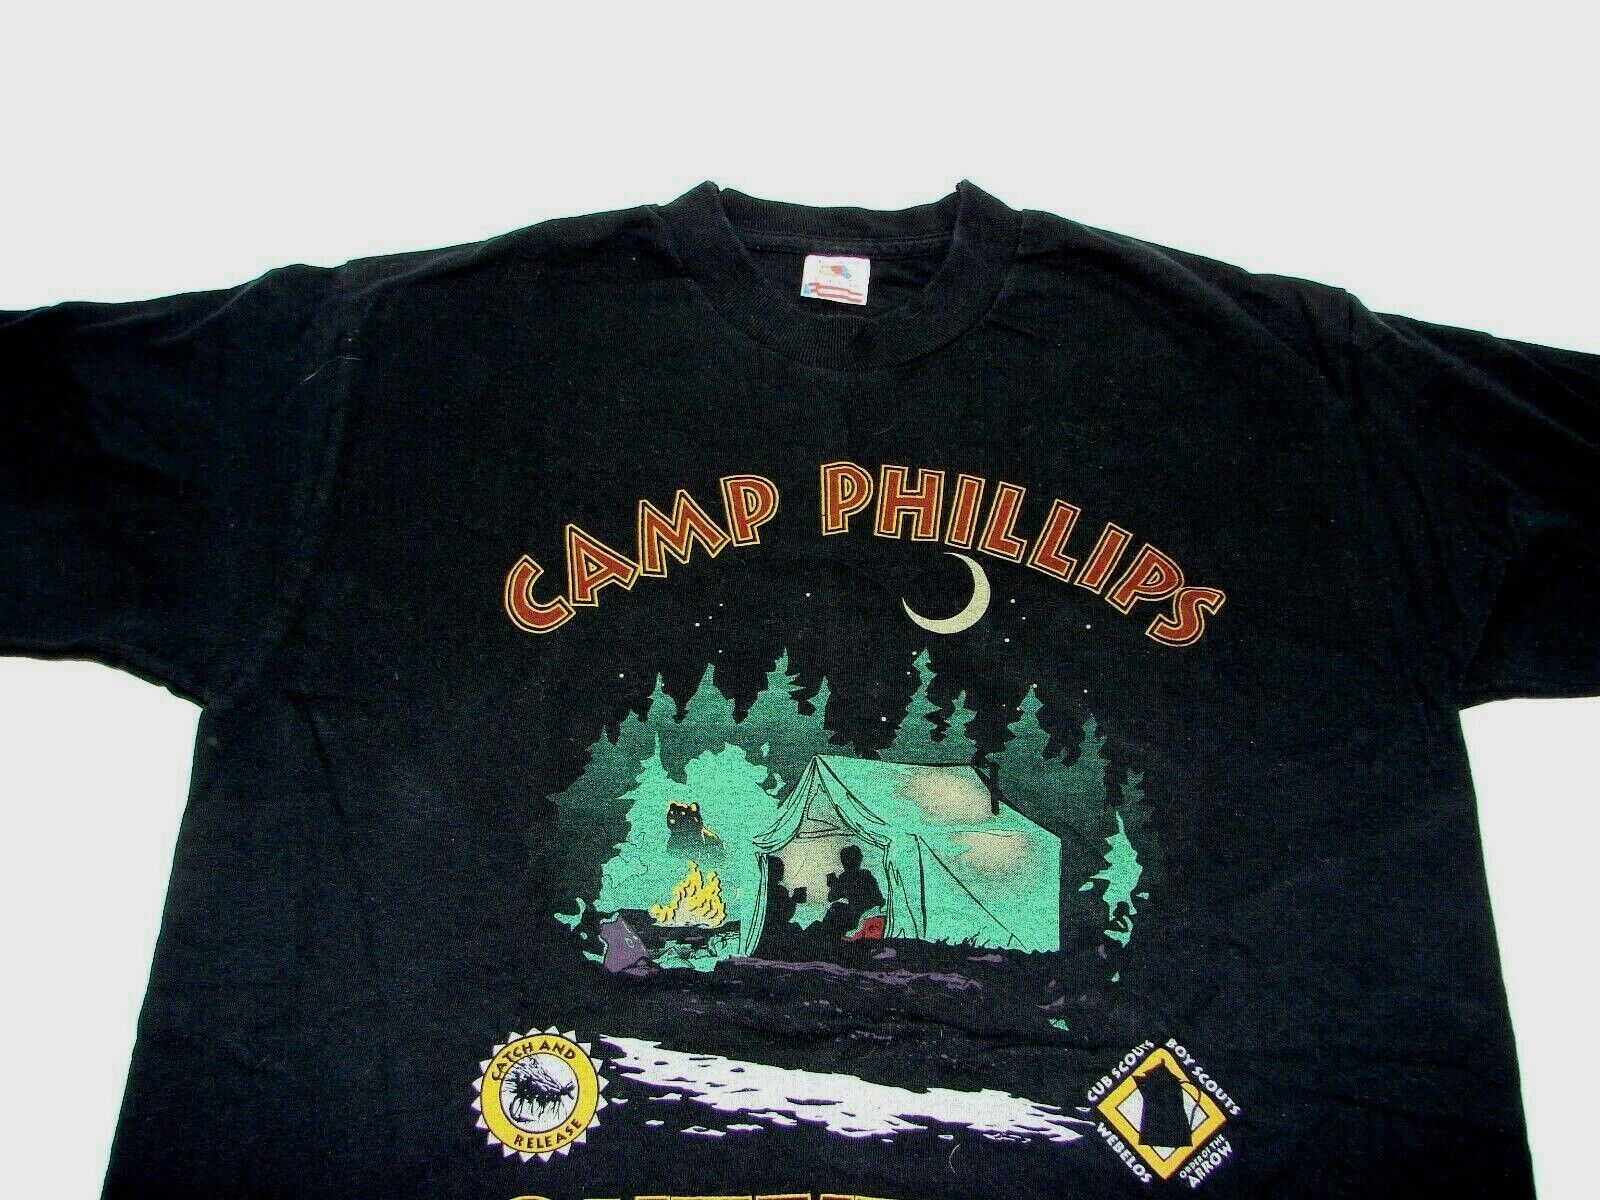 Primary image for Vintage Camp Phillips Outfitters Boy Scouts Black T-Shirt Tee 1995 Men's Large 